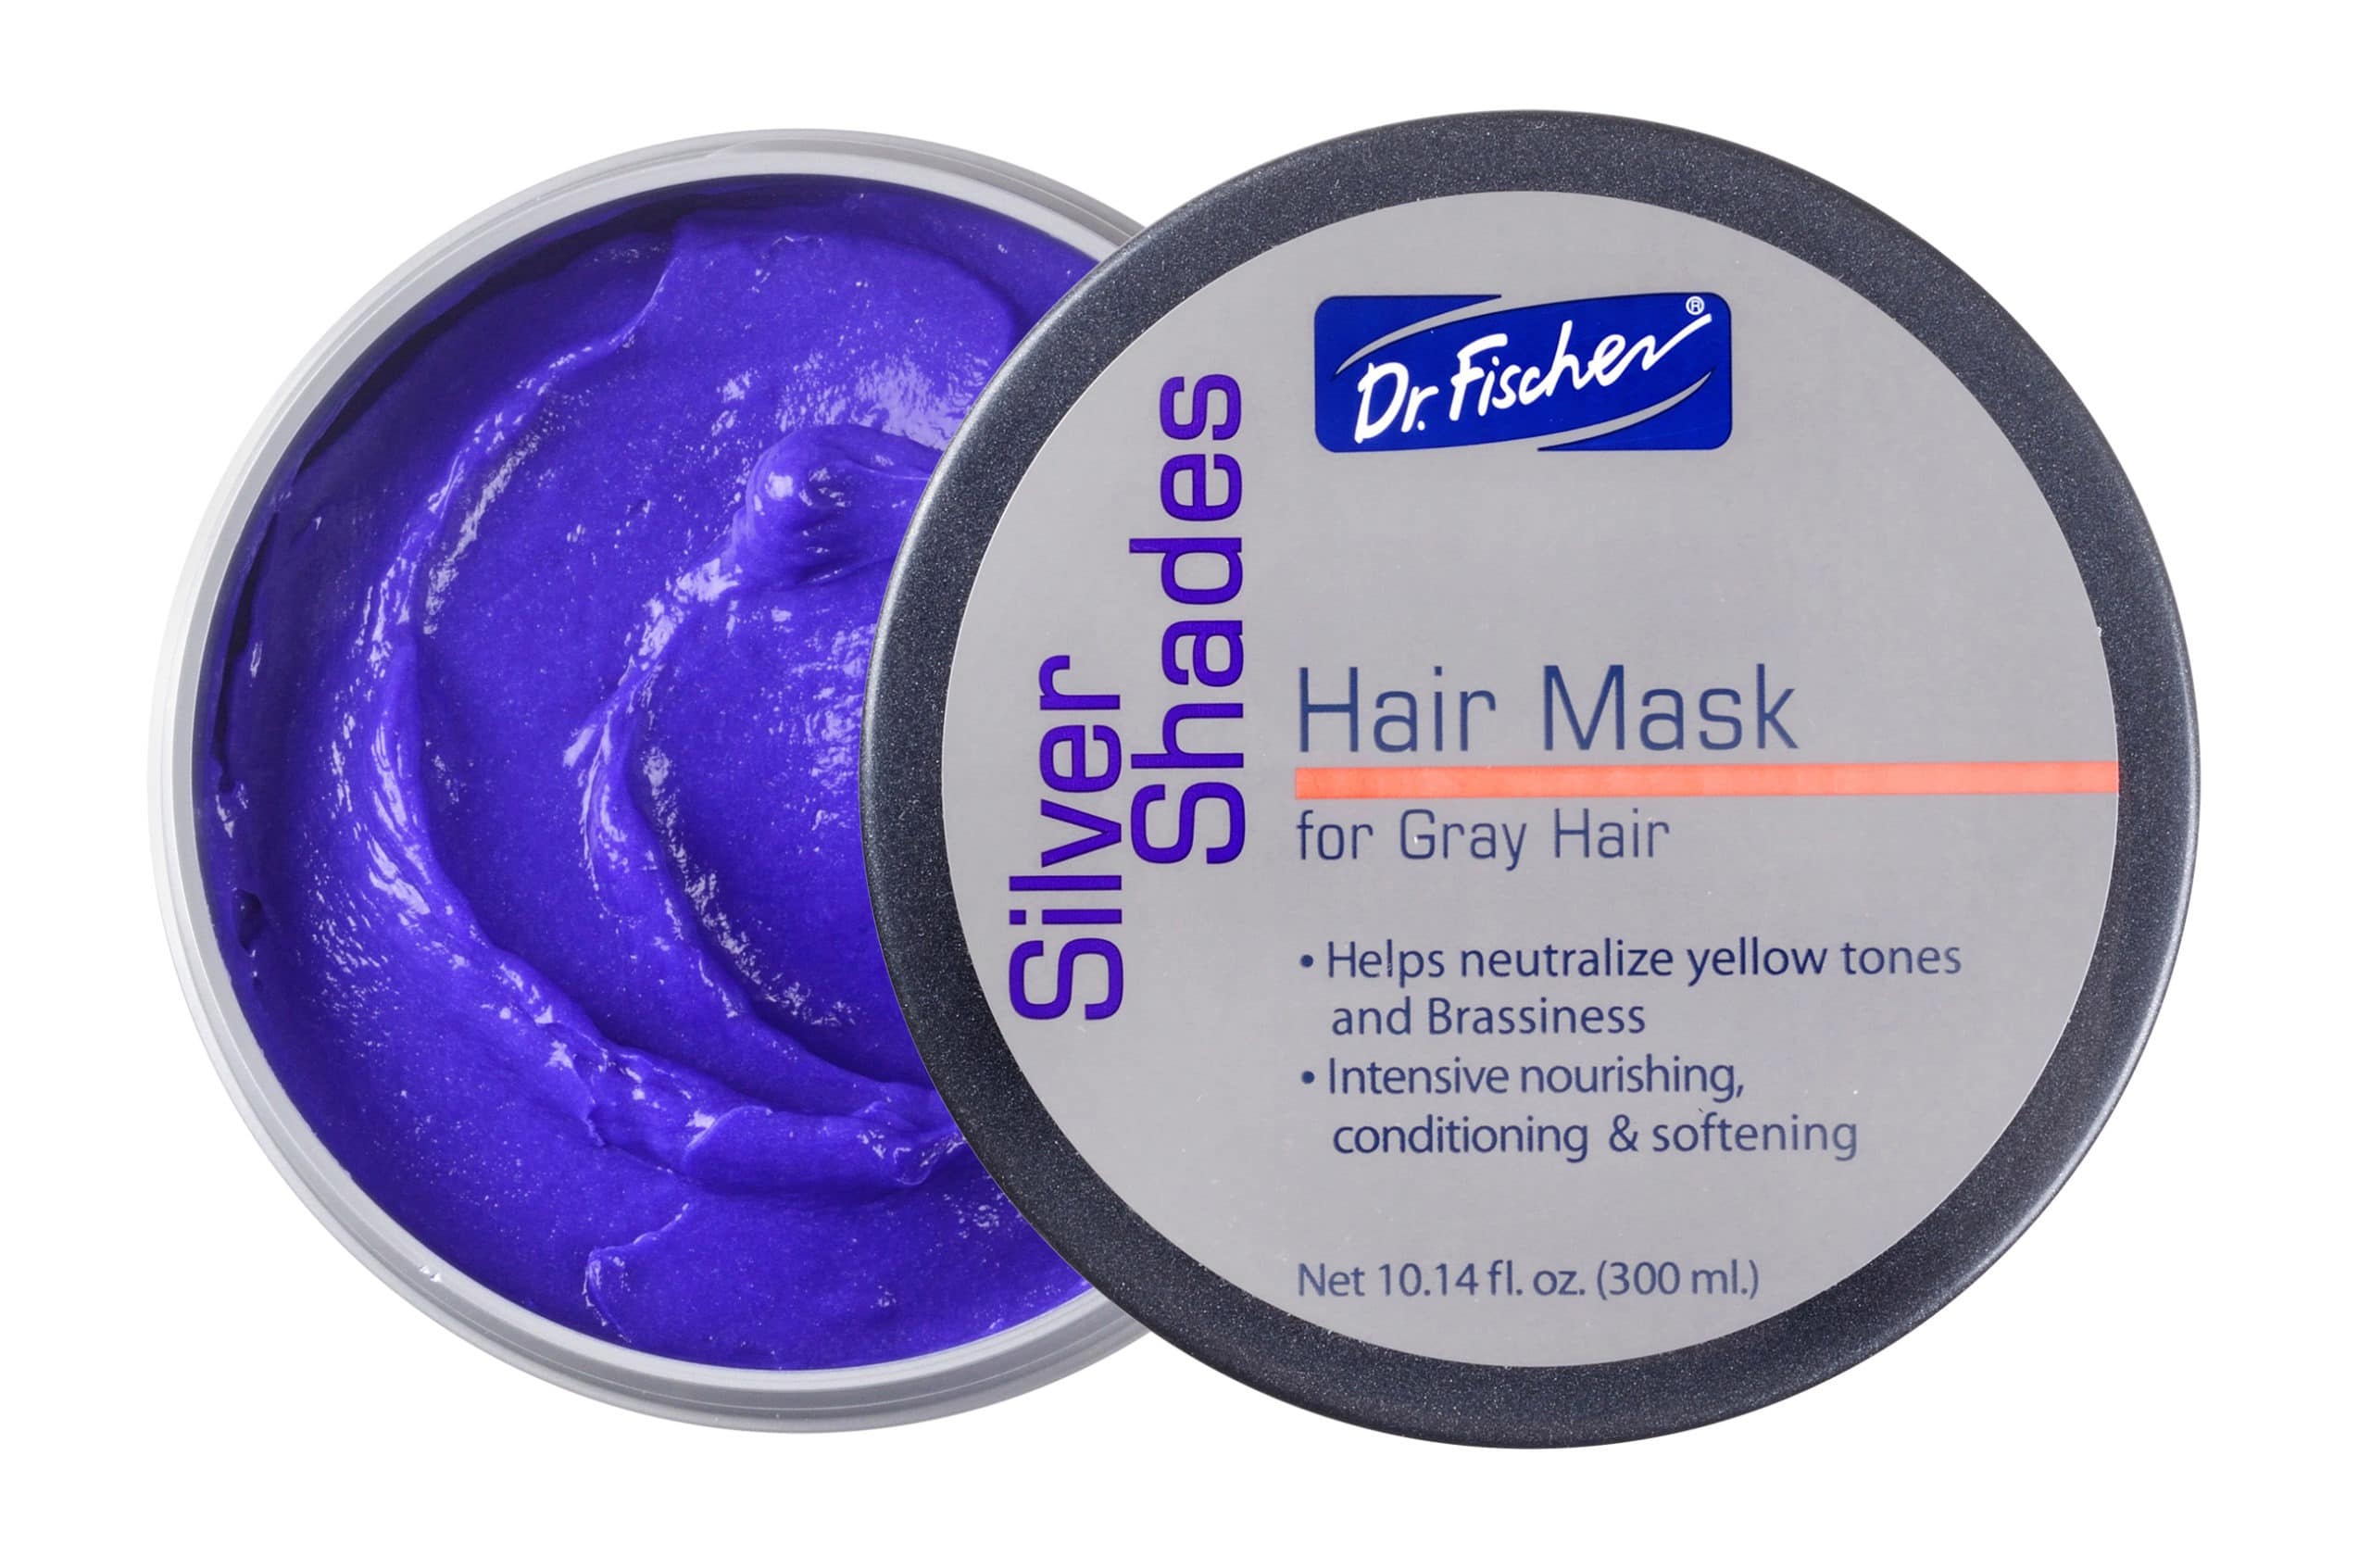 6. Purple Hair Mask for Blonde, Platinum & Silver Hair - Banish Yellow Hues: Blue Masque to Reduce Brassiness & Condition Dry Damaged Hair - Sulfate Free Toner - 7.27 Fl. Oz / 215 ml - wide 2